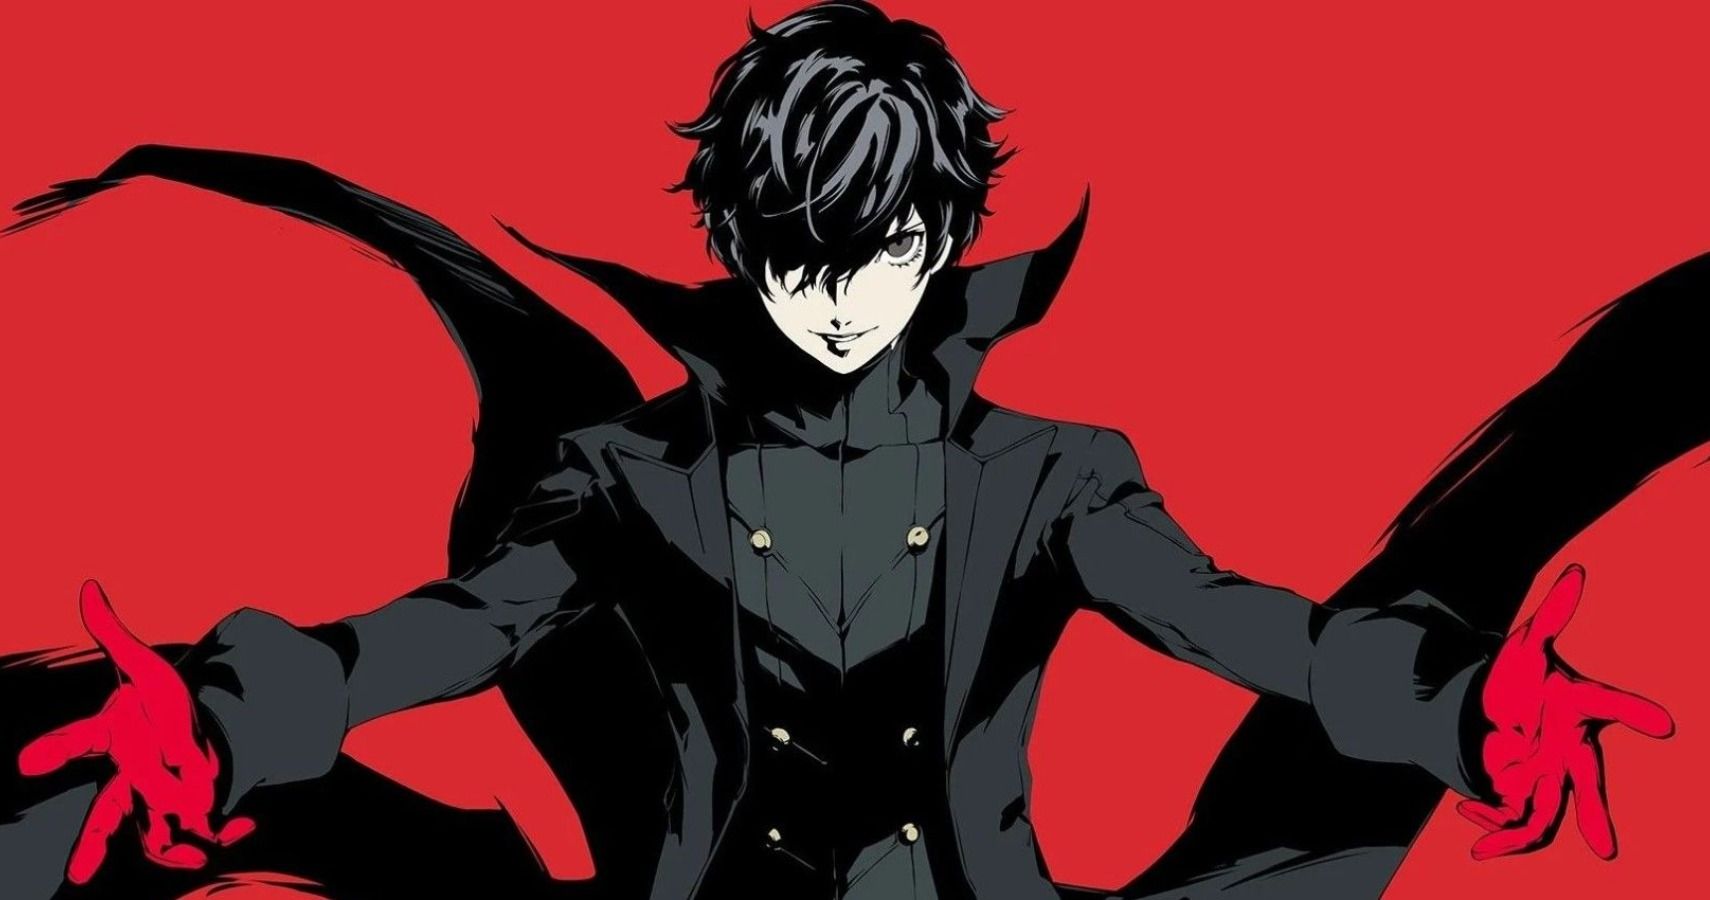 The Persona 5 Soundtrack Is On Spotify Now - Here's Why That Matters